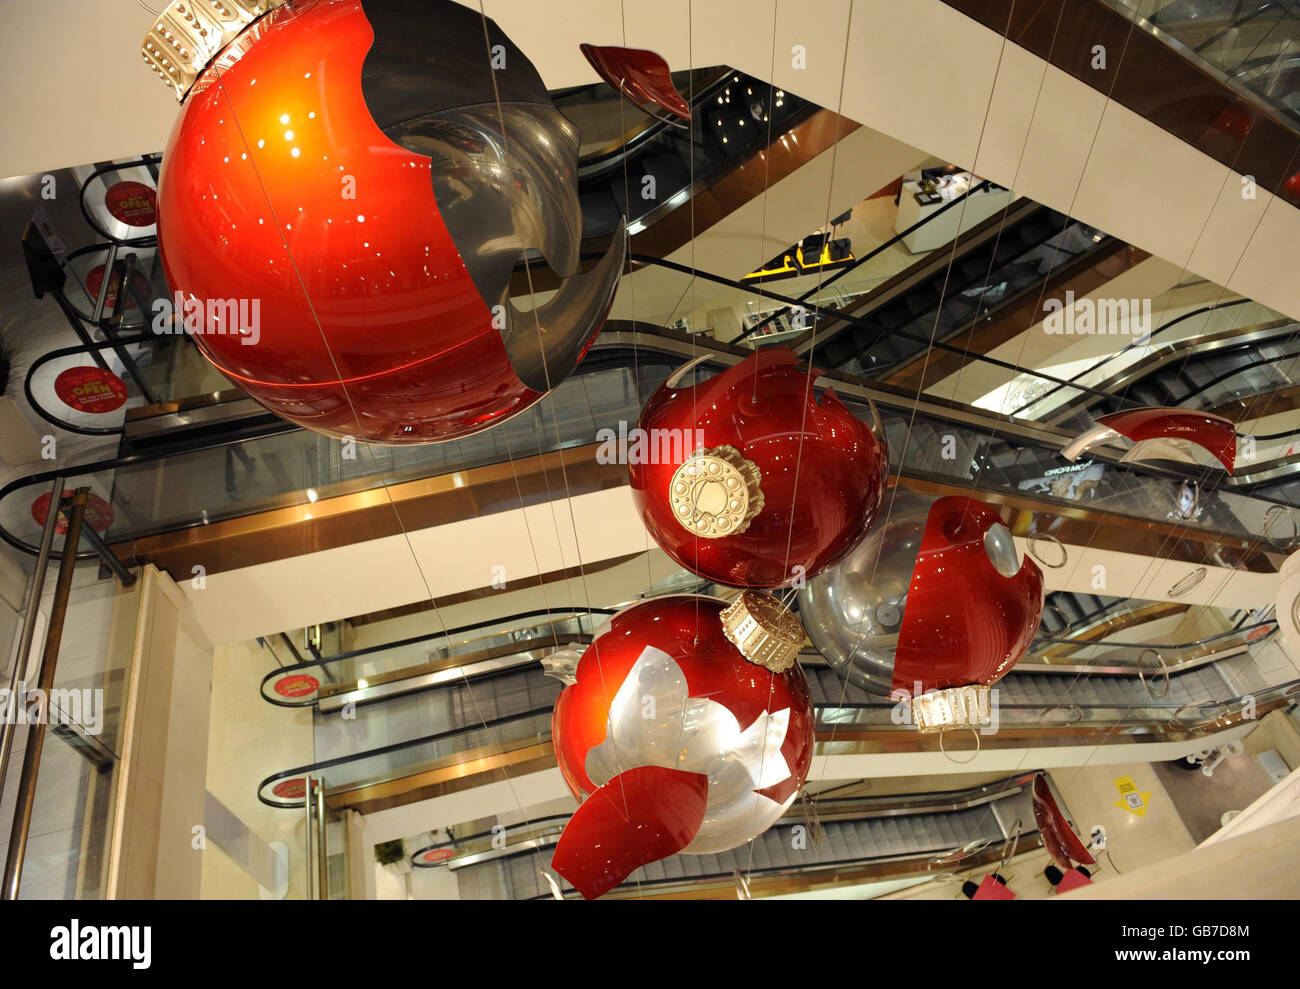 Giant red baubles in Selfridges department store in central London go on display. They are part of an artwork by Claire Morgan and form part of this year's Christmas decorations. Stock Photo